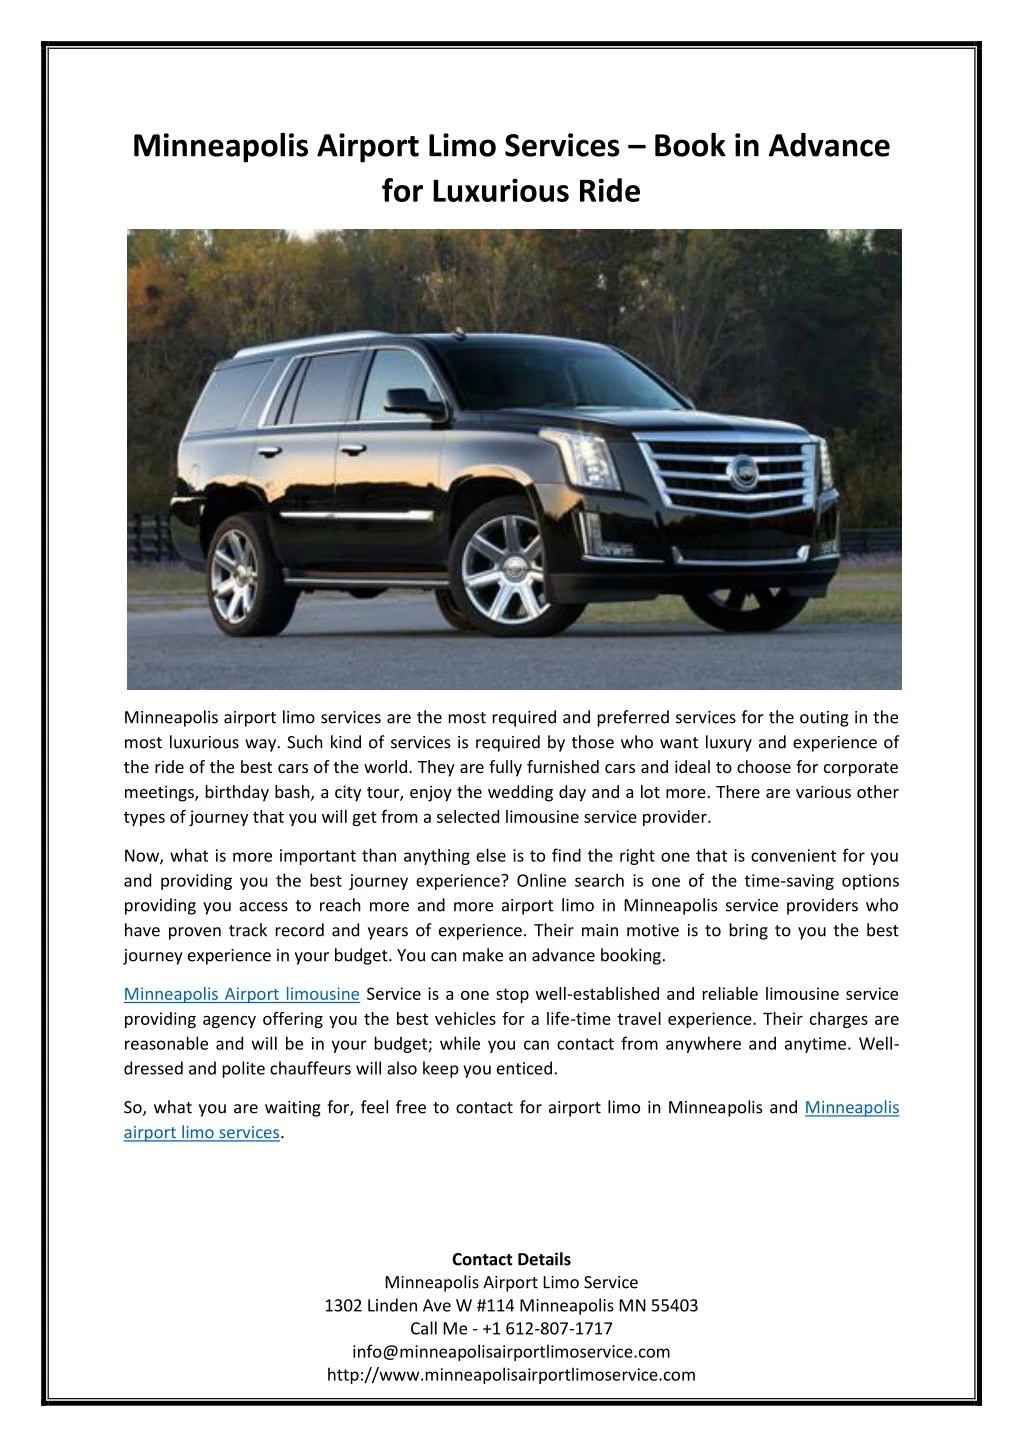 minneapolis airport limo services book in advance